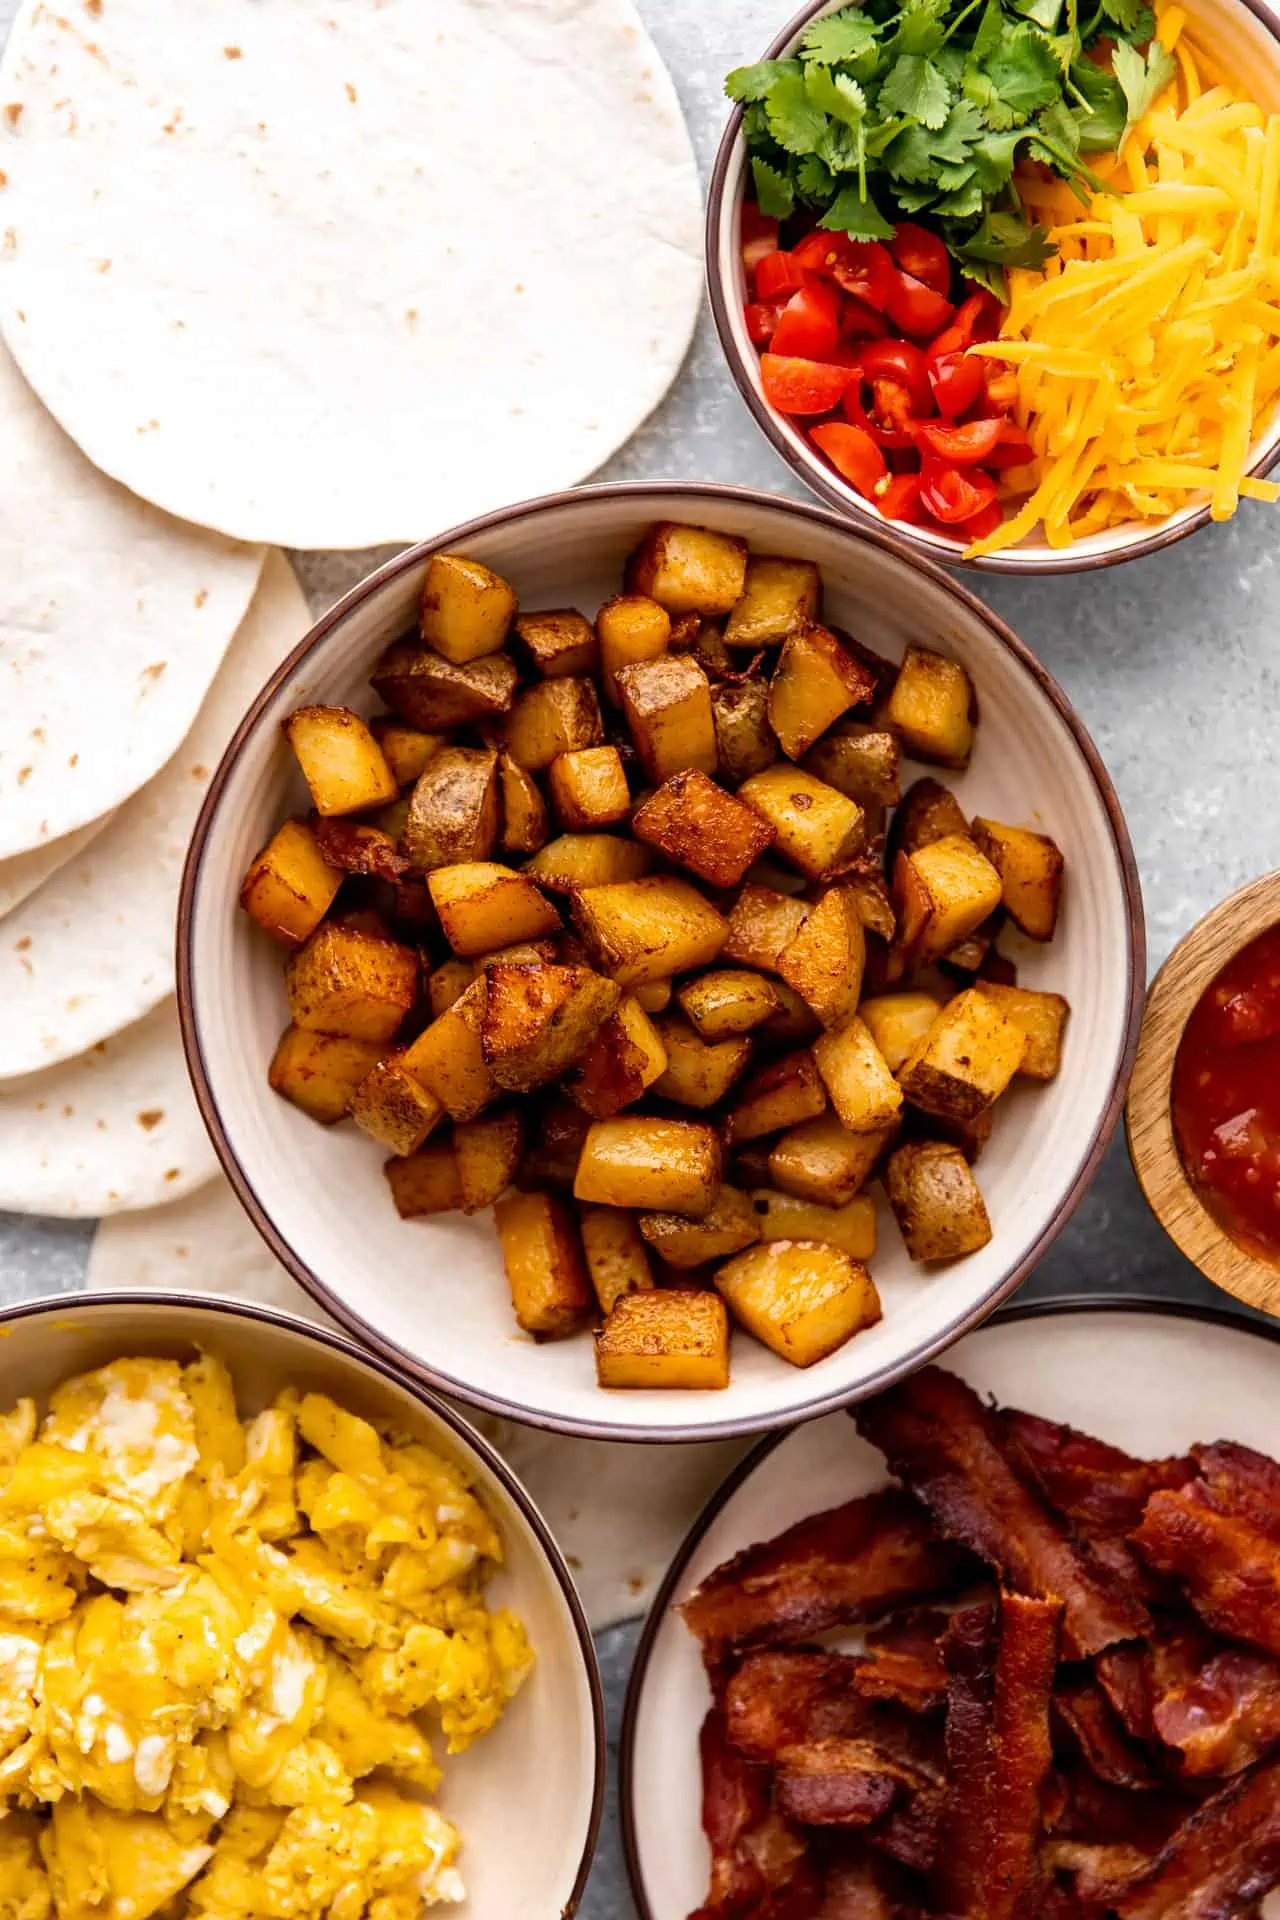 All the ingredients and toppings laid out to assemble breakfast tacos.